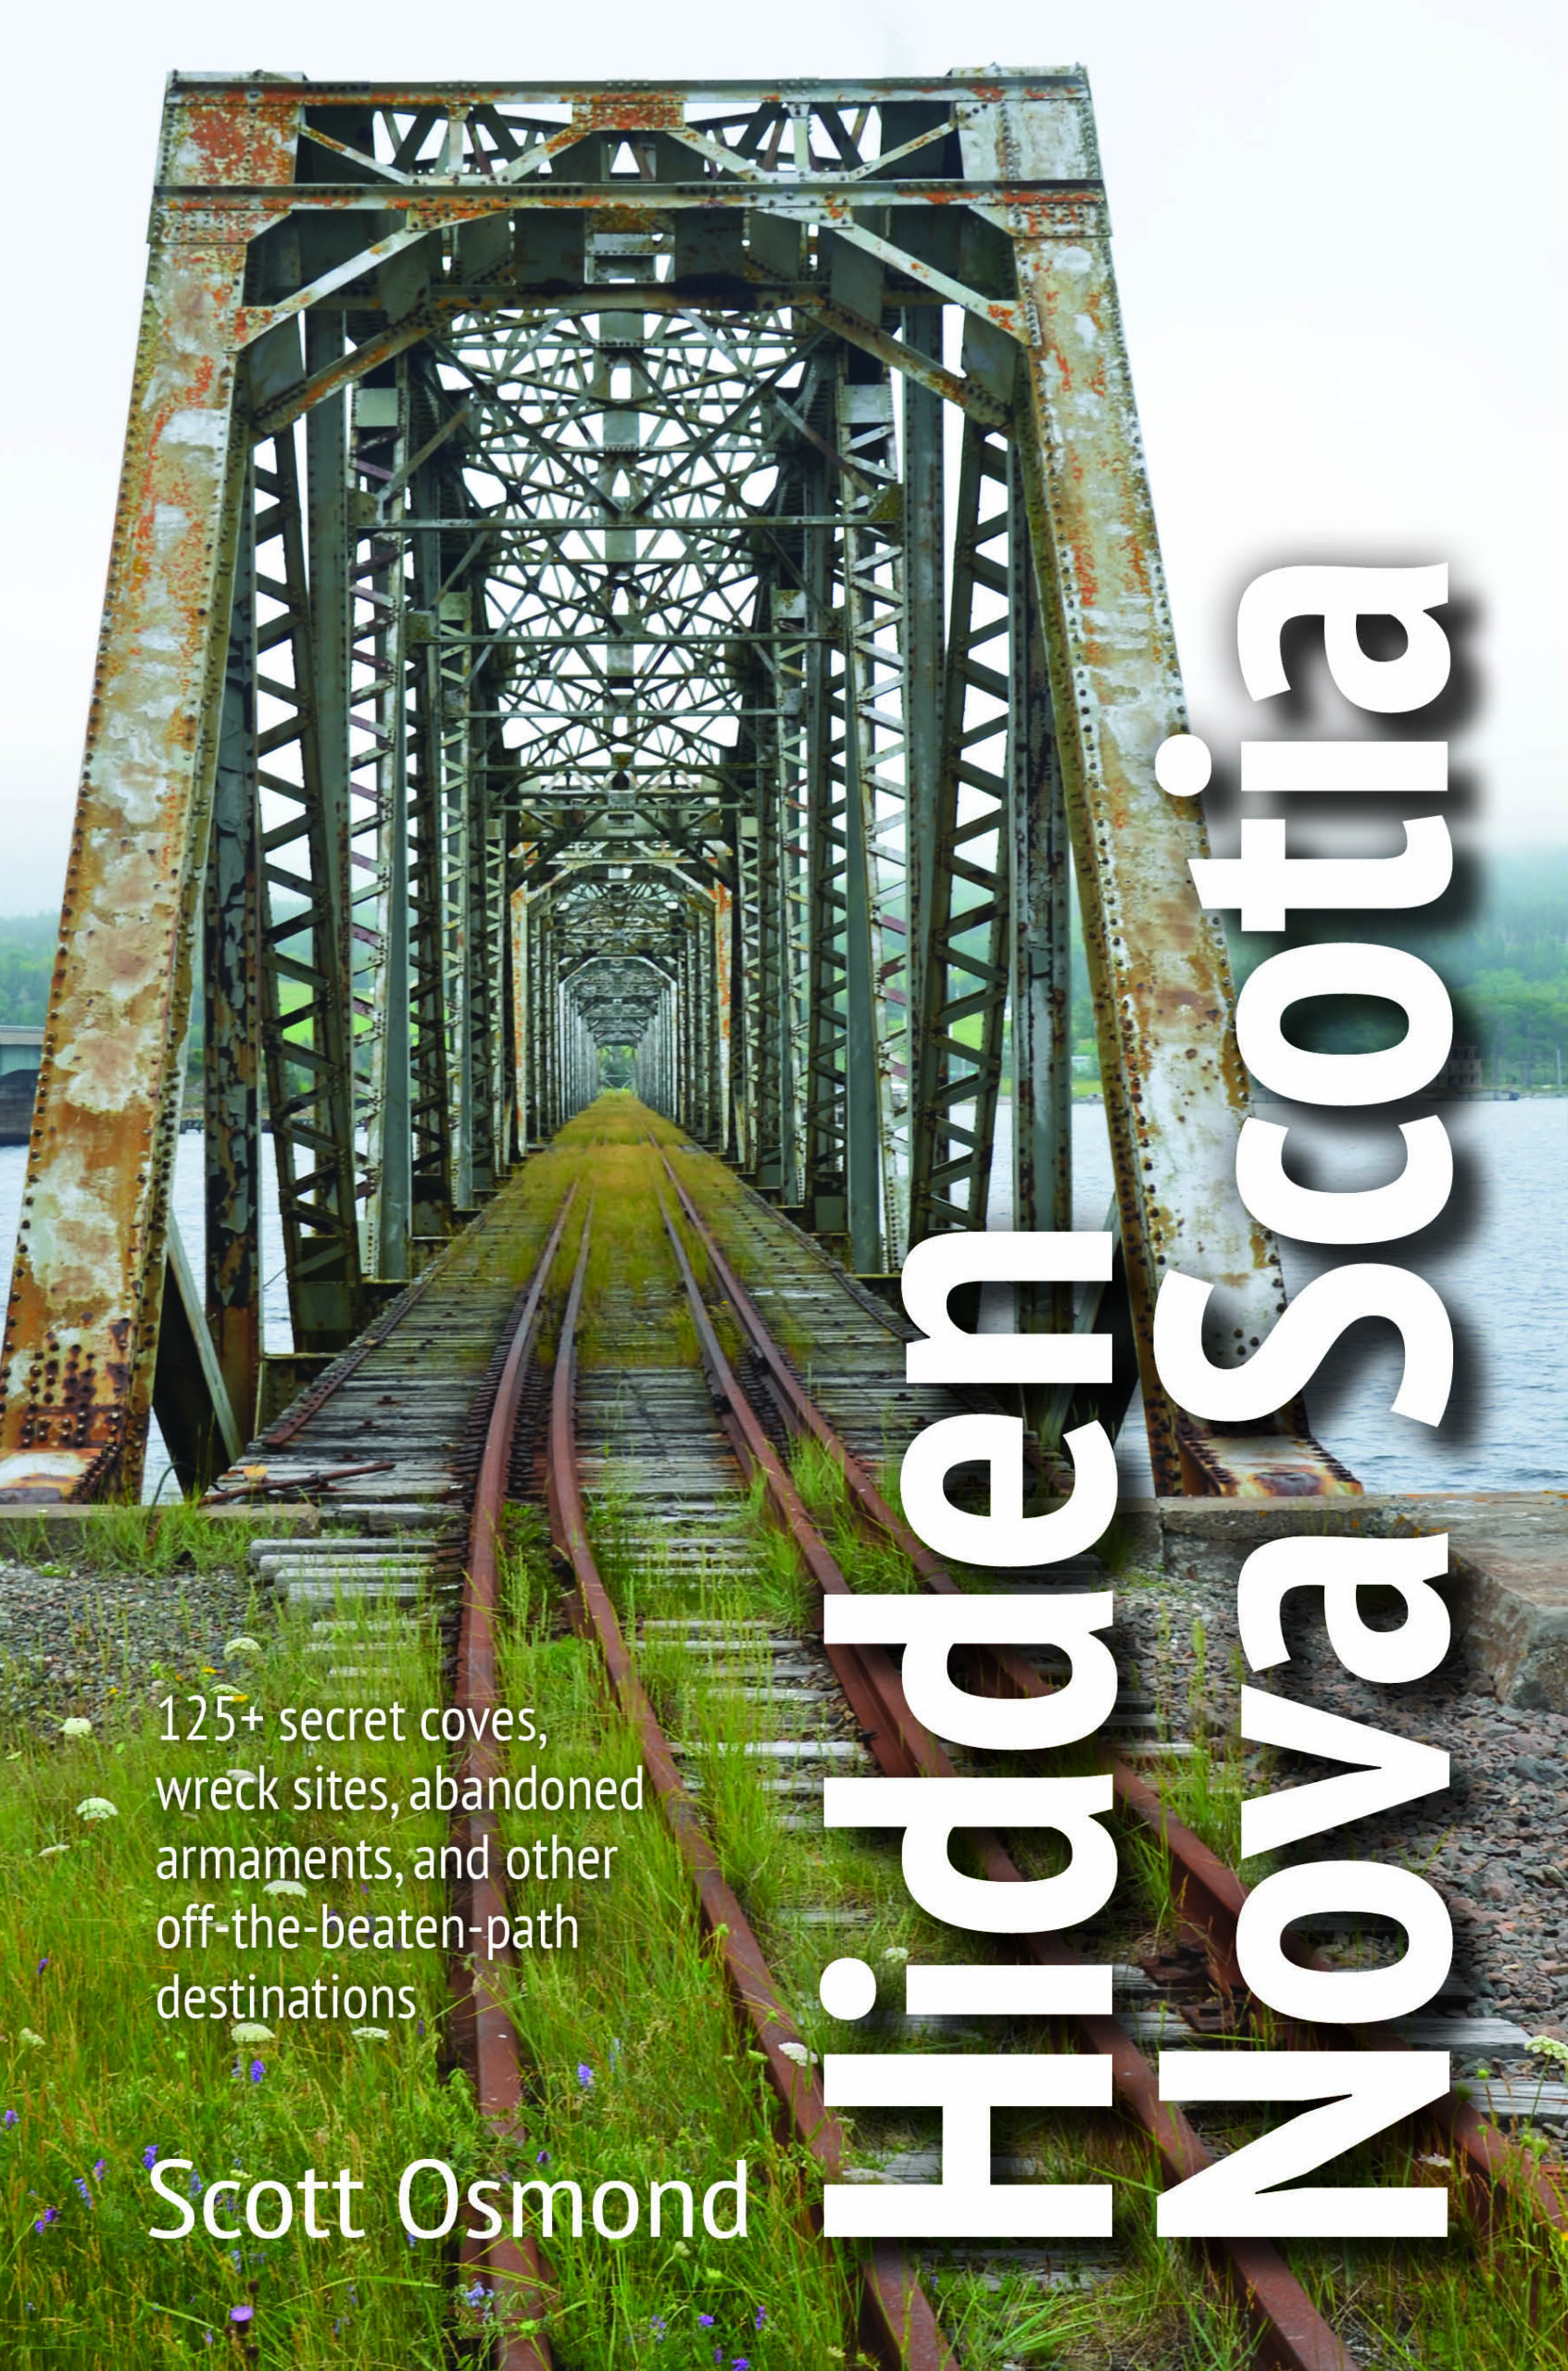 Front cover of Hidden Nova Scotia: 125+ secret coves, wreck sites, abandoned armaments, and other off- the-beaten-path destinations. Title over photo of railway bridge.